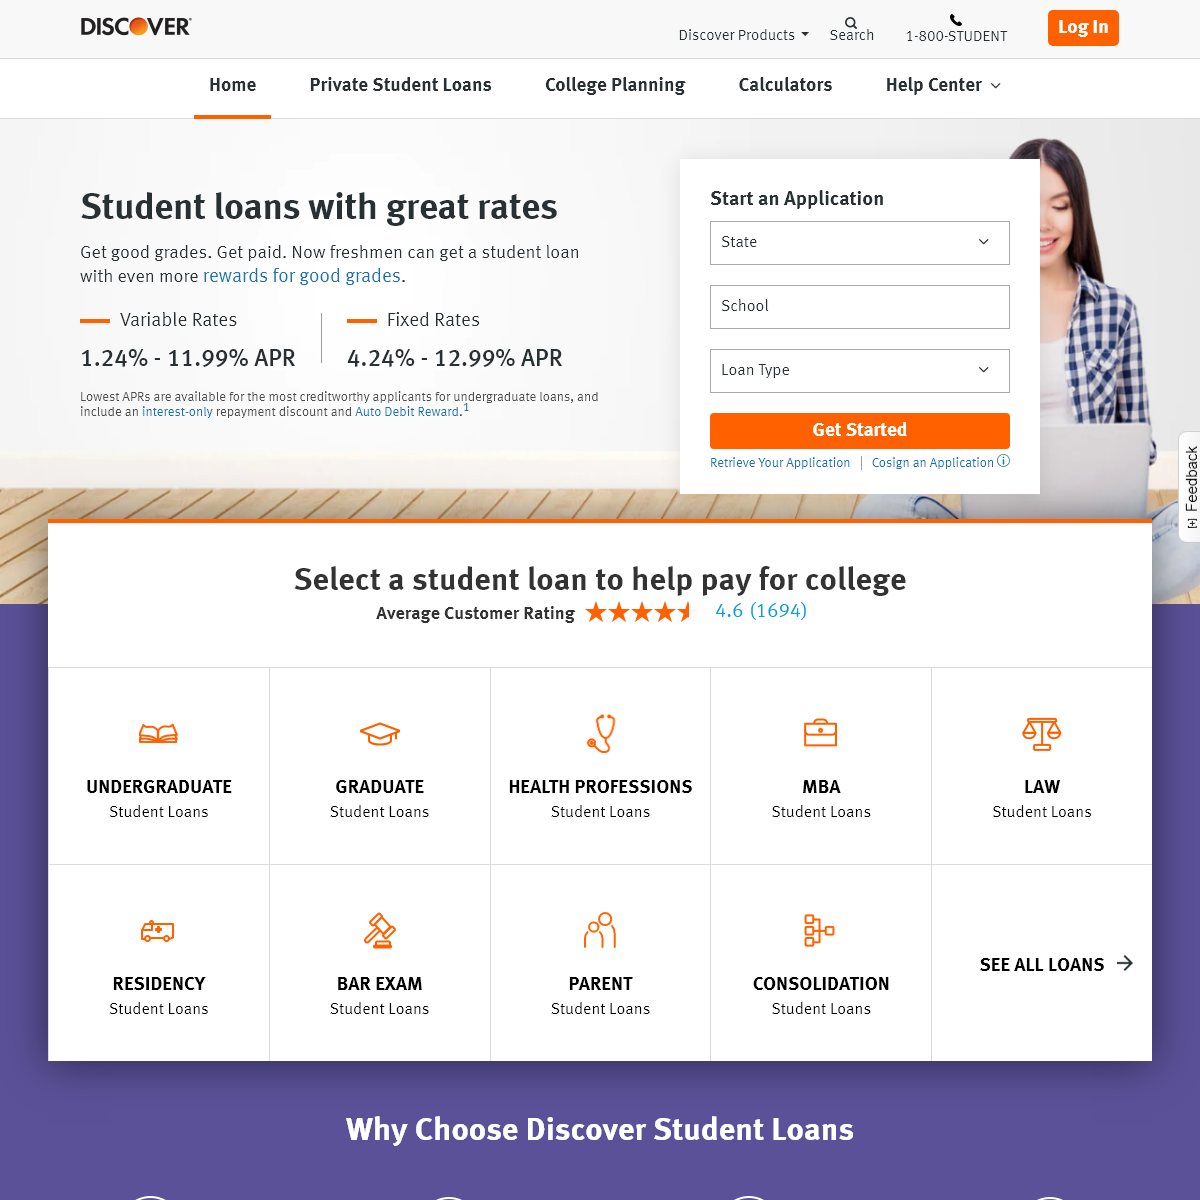 A complete backup of discoverstudentloans.com